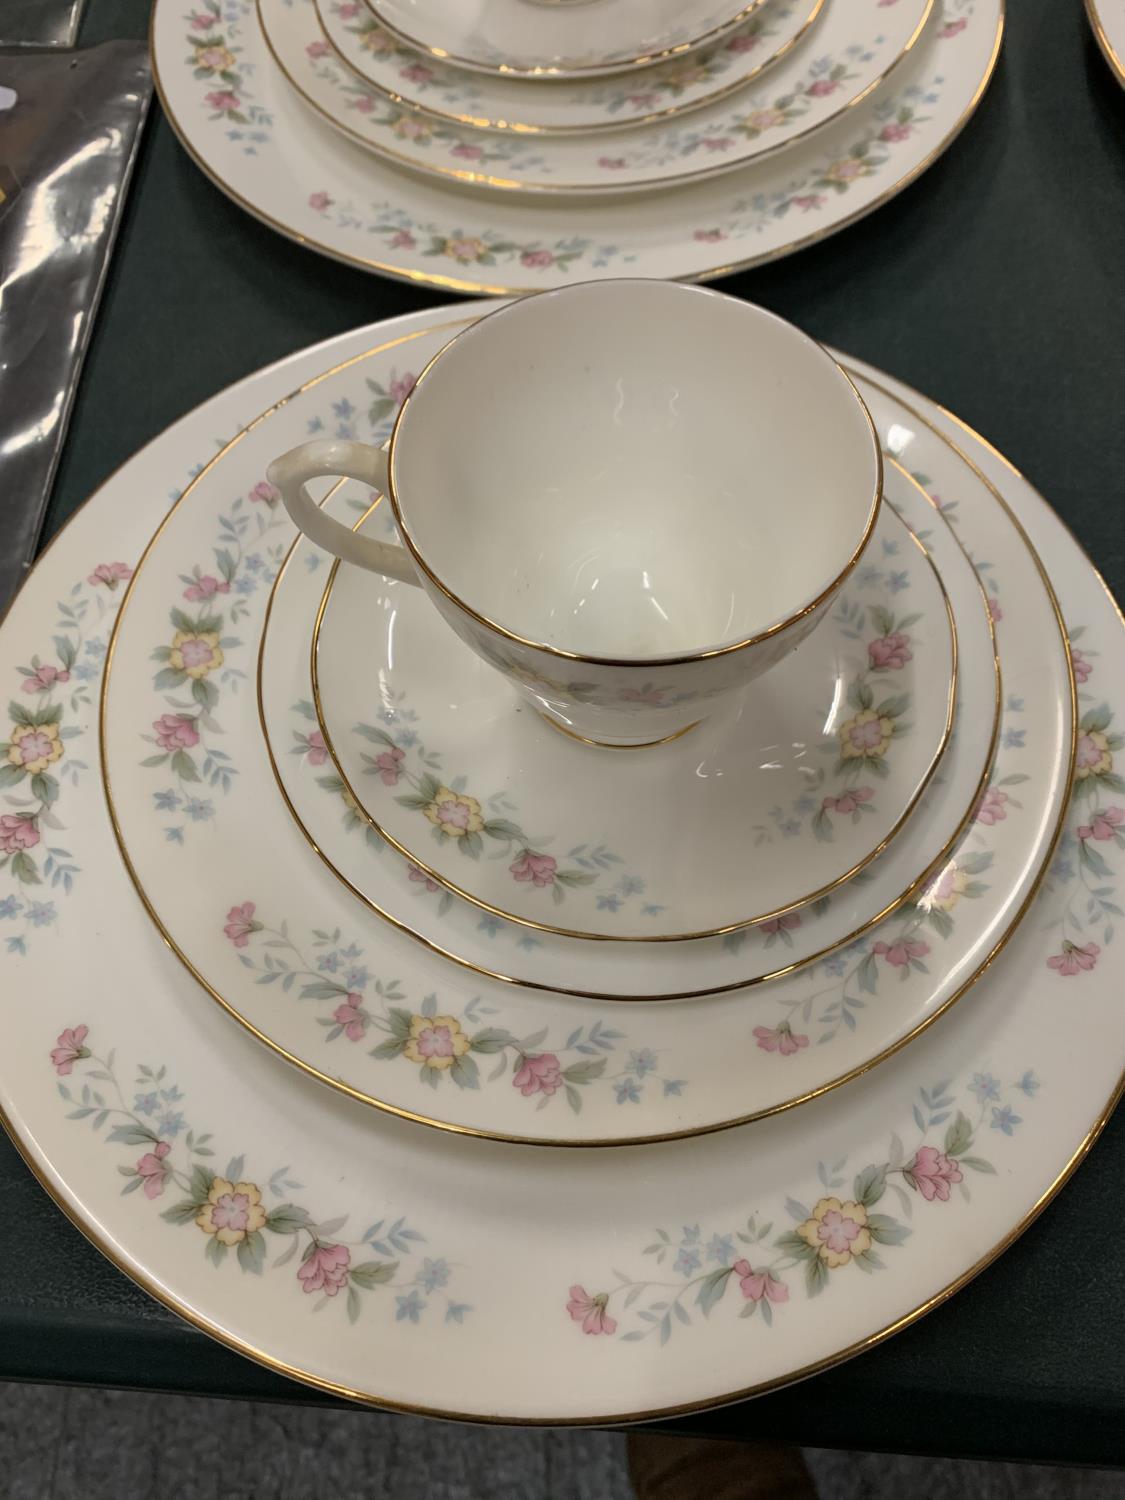 A SALISBURY DINNER SET WITH FLORAL DESIGN - Image 3 of 3